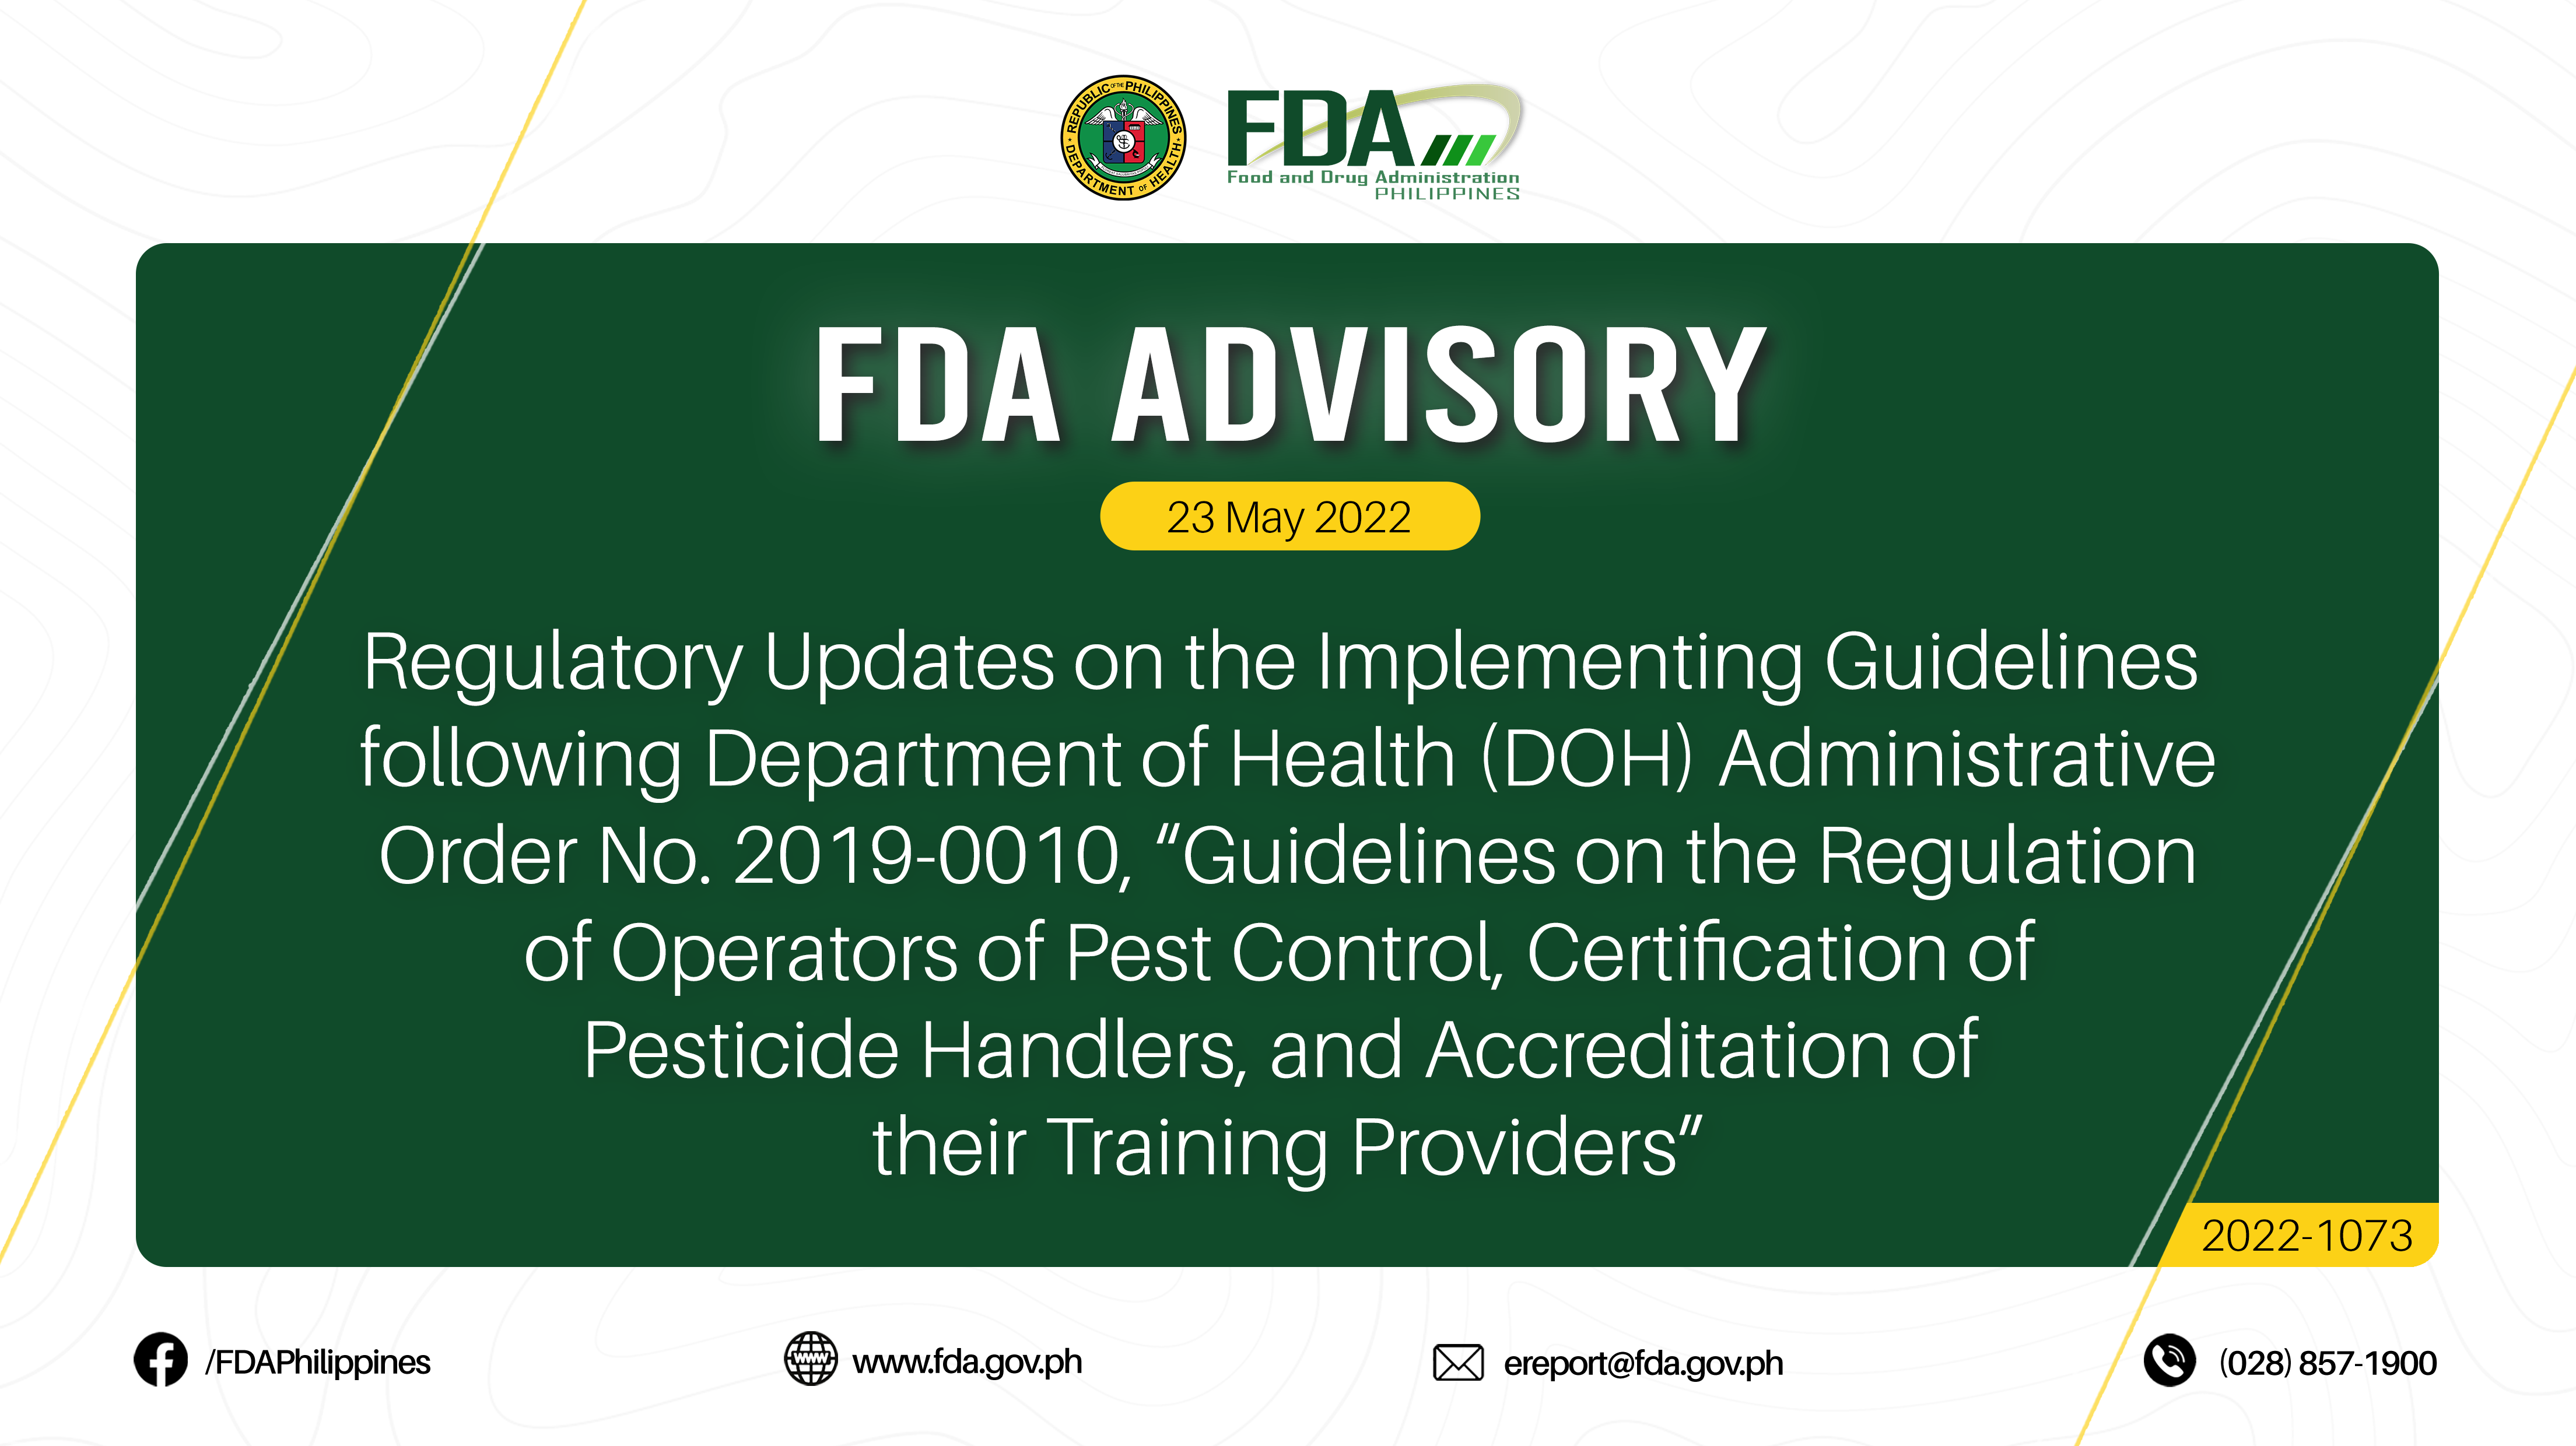 FDA Advisory No.2022-1073 || Regulatory Updates on the Implementing Guidelines following Department of Health (DOH) Administrative Order No. 2019-0010, “Guidelines on the Regulation of Operators of Pest Control, Certification of Pesticide Handlers, and Accreditation of their Training Providers”